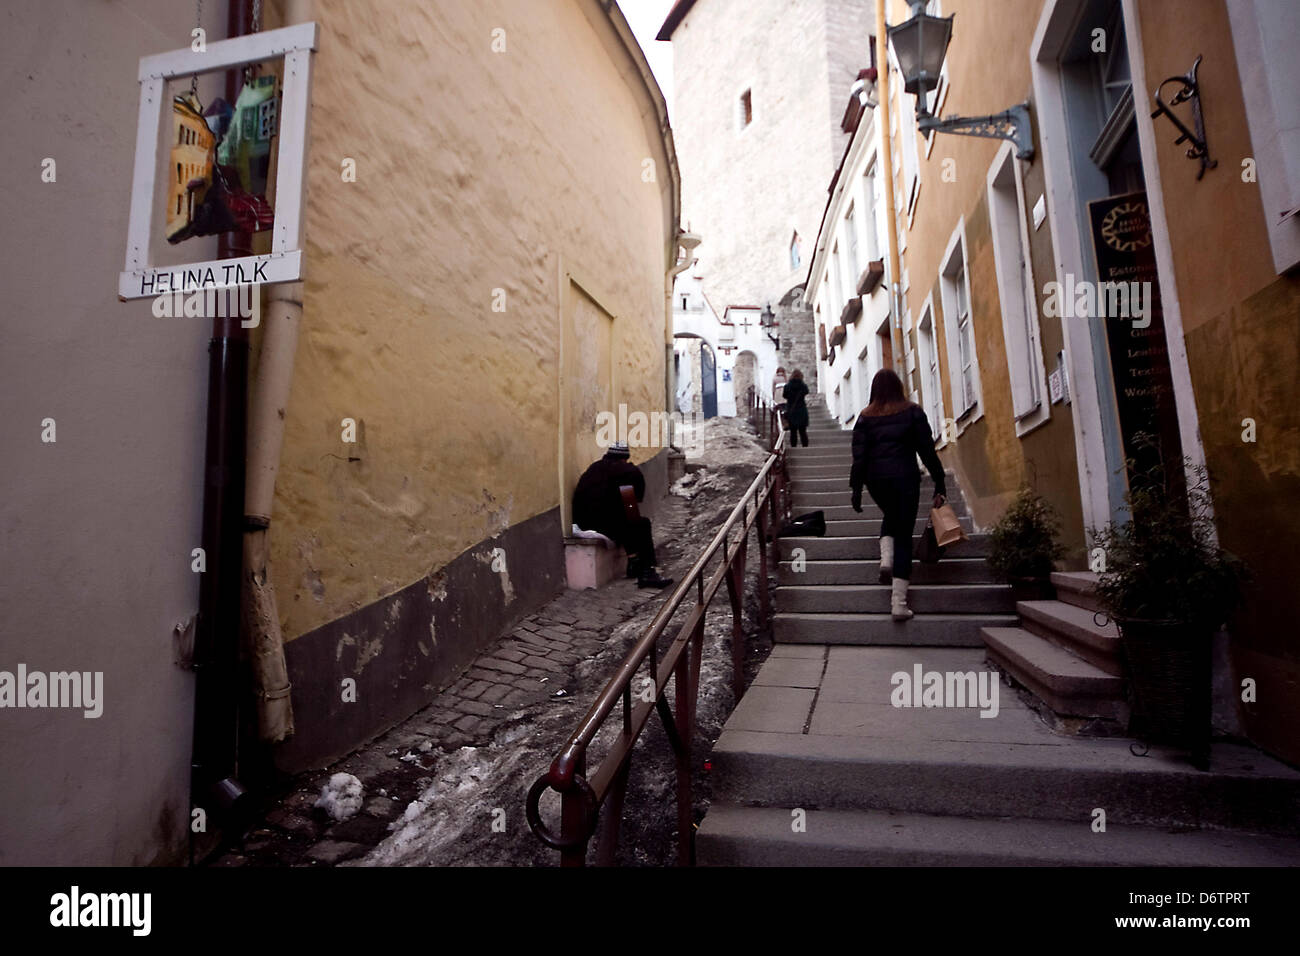 Insight into a narrow street with cobblestones and old houses at dusk in the Estonian capital Tallinn. Stock Photo